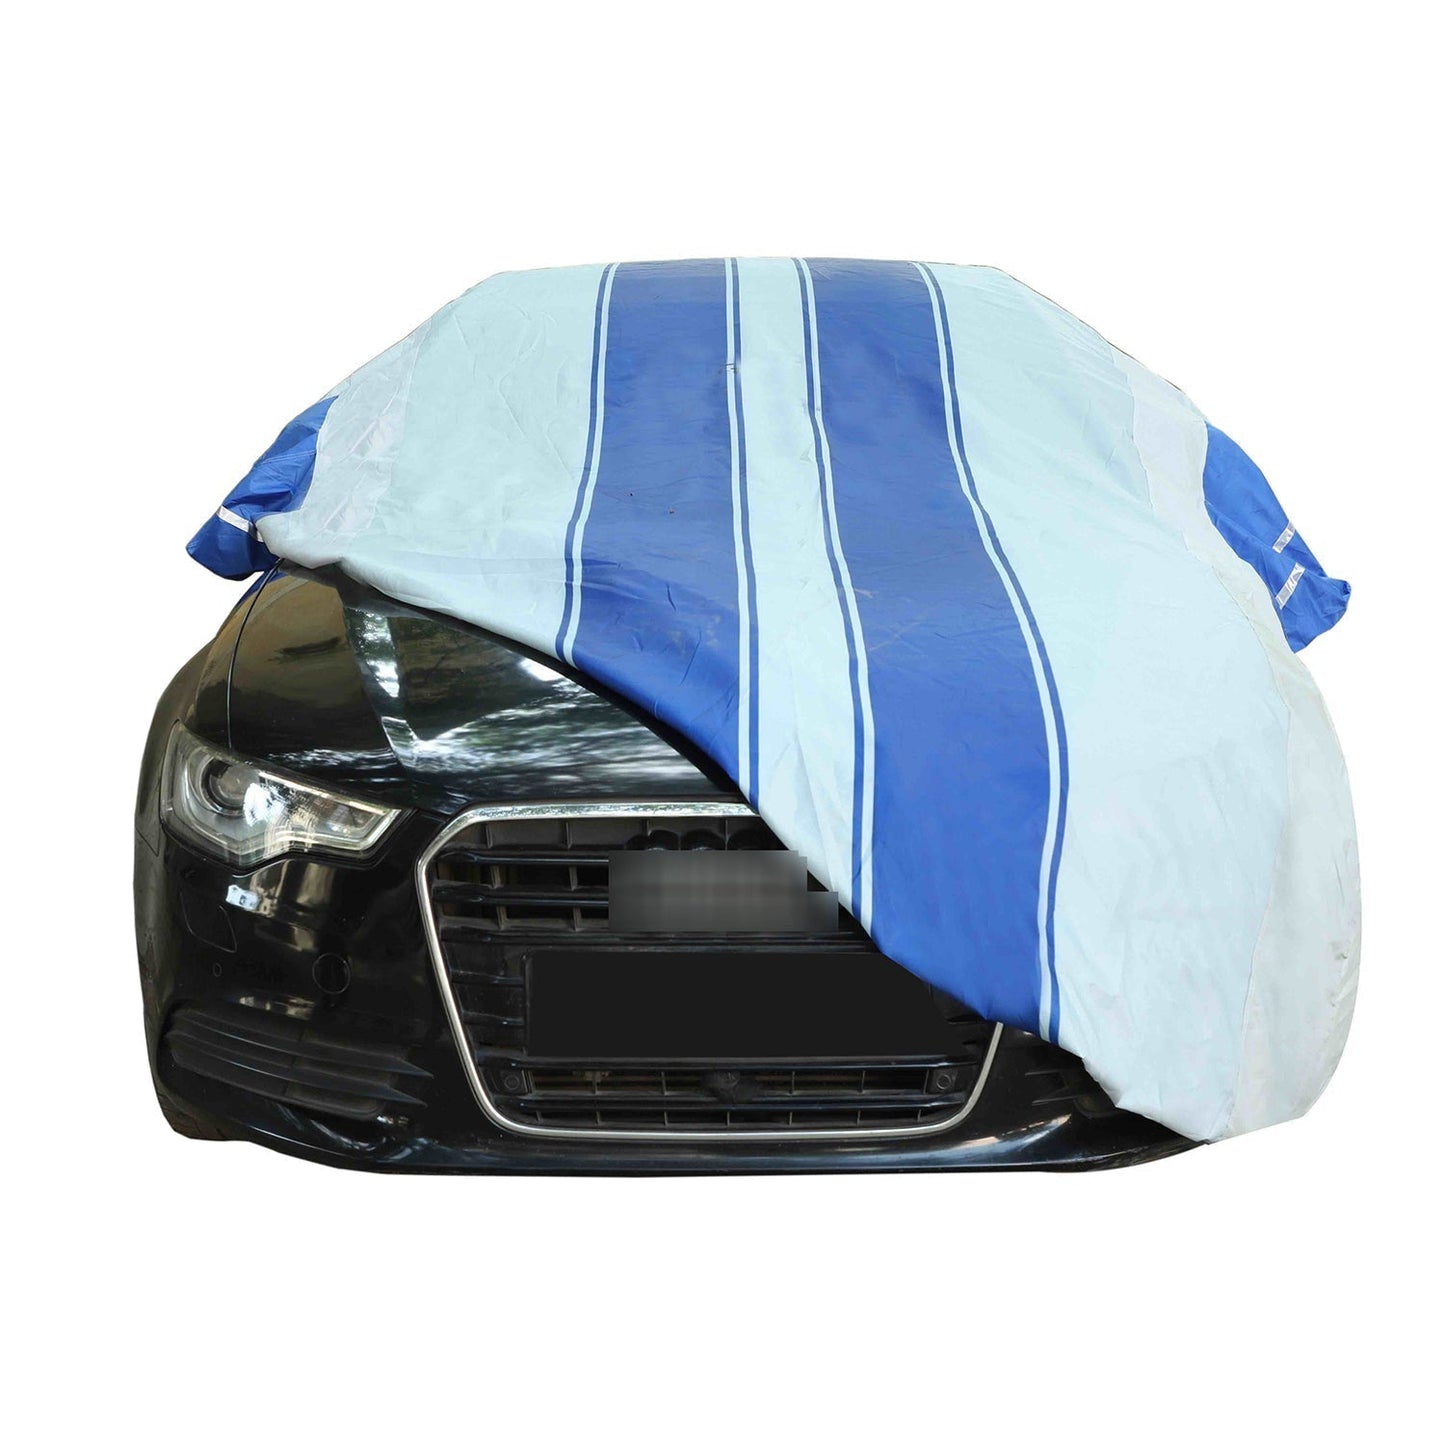 Oshotto 100% Blue dustproof and Water Resistant Car Body Cover with Mirror Pockets For Maruti Suzuki 800